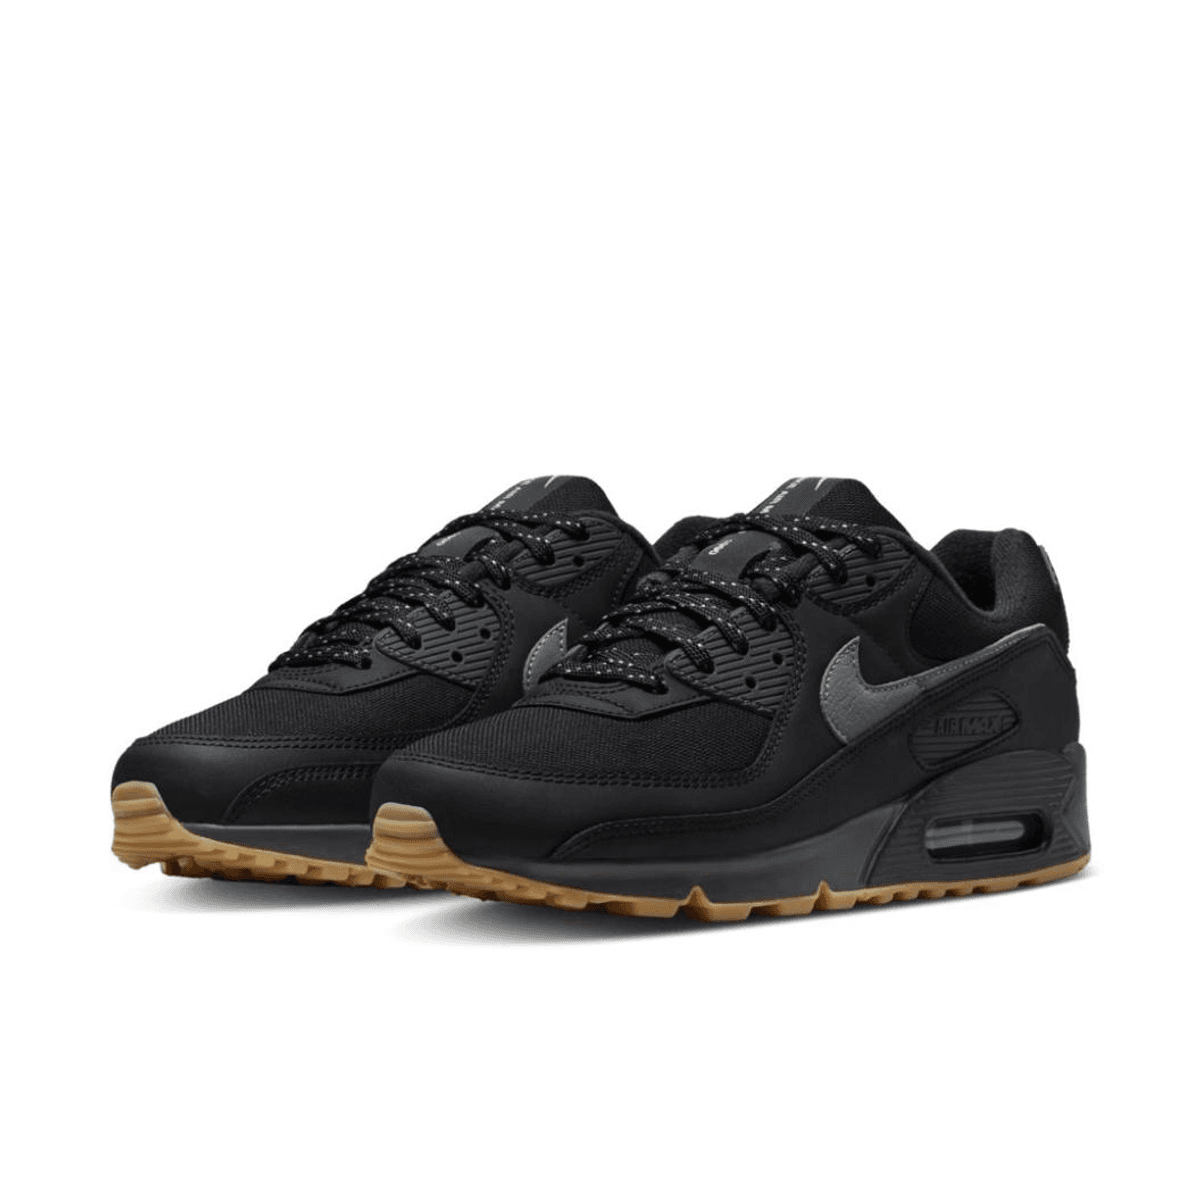 The Nike Air Max 90 Goes Stealth Mode In The Black Gum Colorway